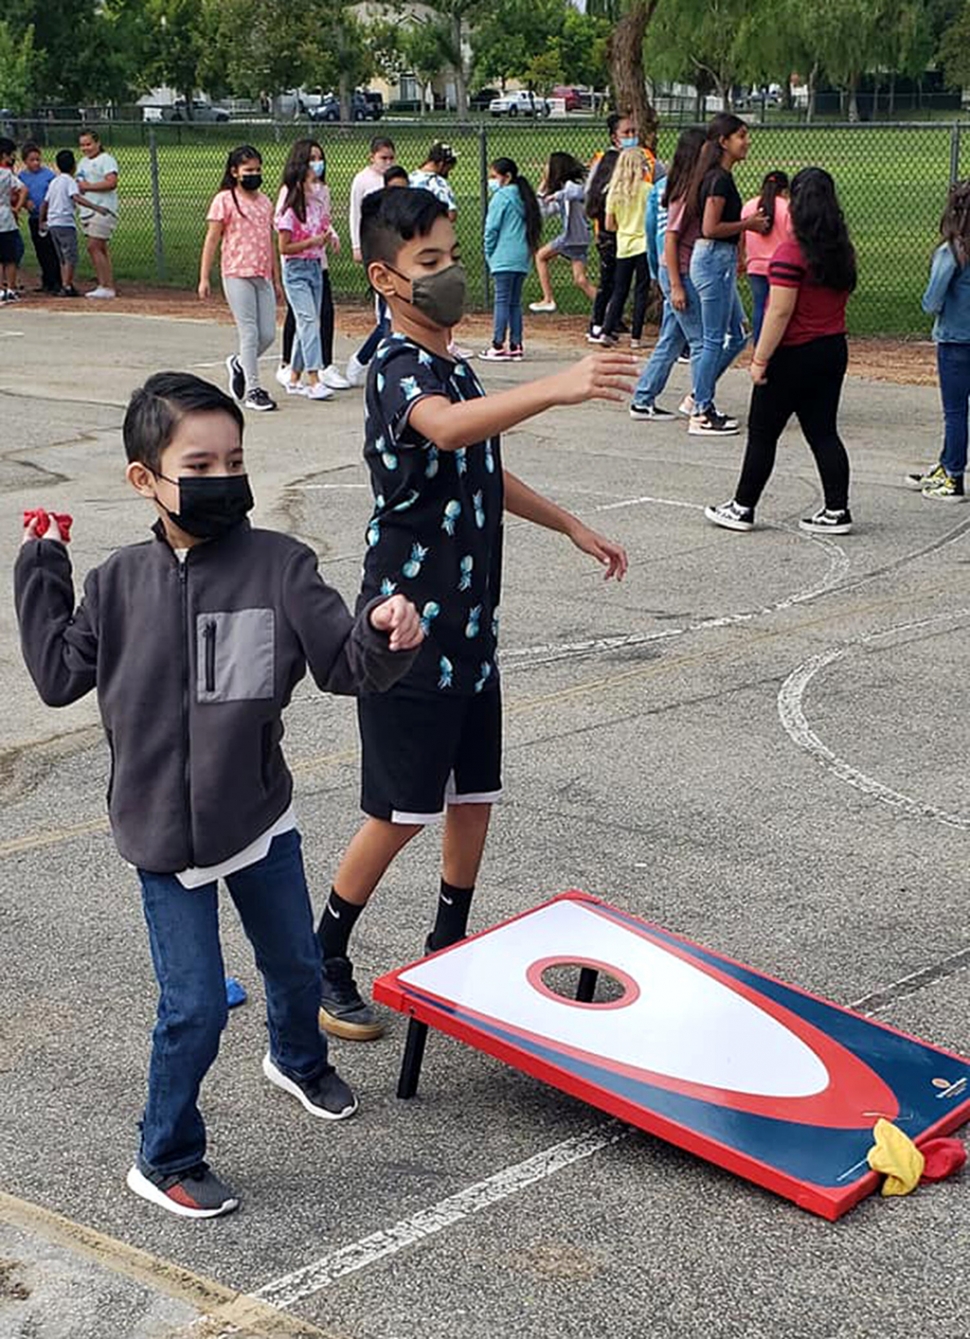 Thursday, August 19th was the first day of school for Fillmore Unified. Students at Mountain Vista Wildcats are back! They had a great first day of the 2021-2022 school year. (Above) students playing cornhole during recess. Photos courtesy Mountain Vista School Website.